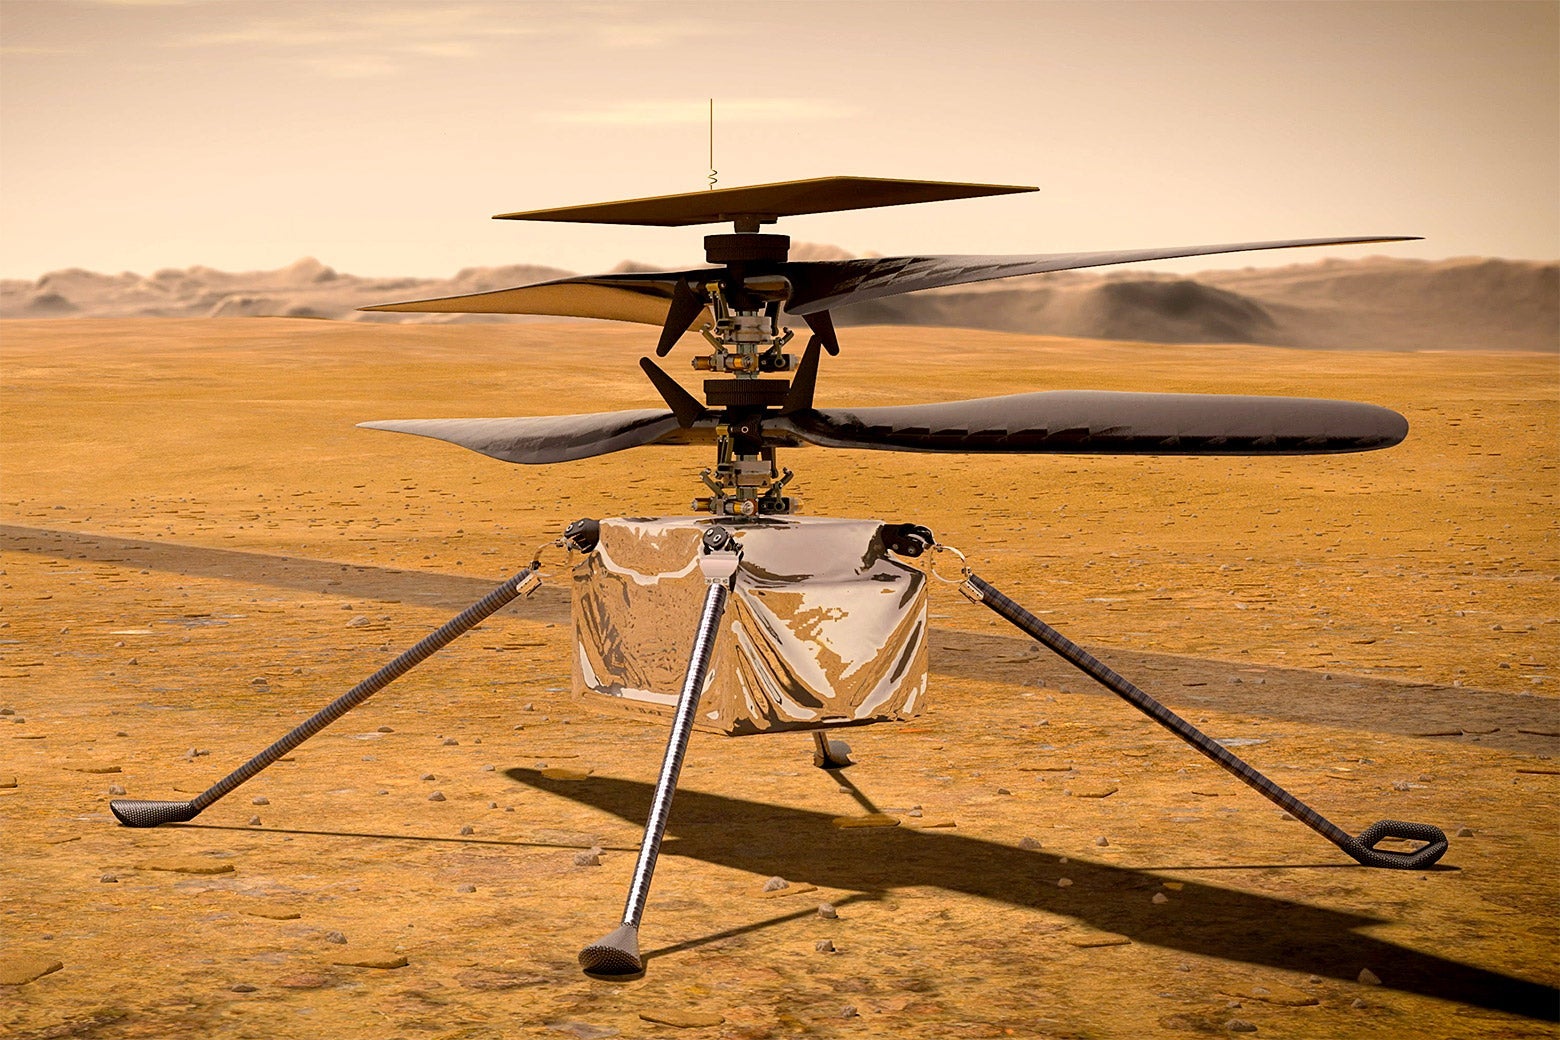 An illustration of the Ingenuity Mars helicopter on the martian surface.